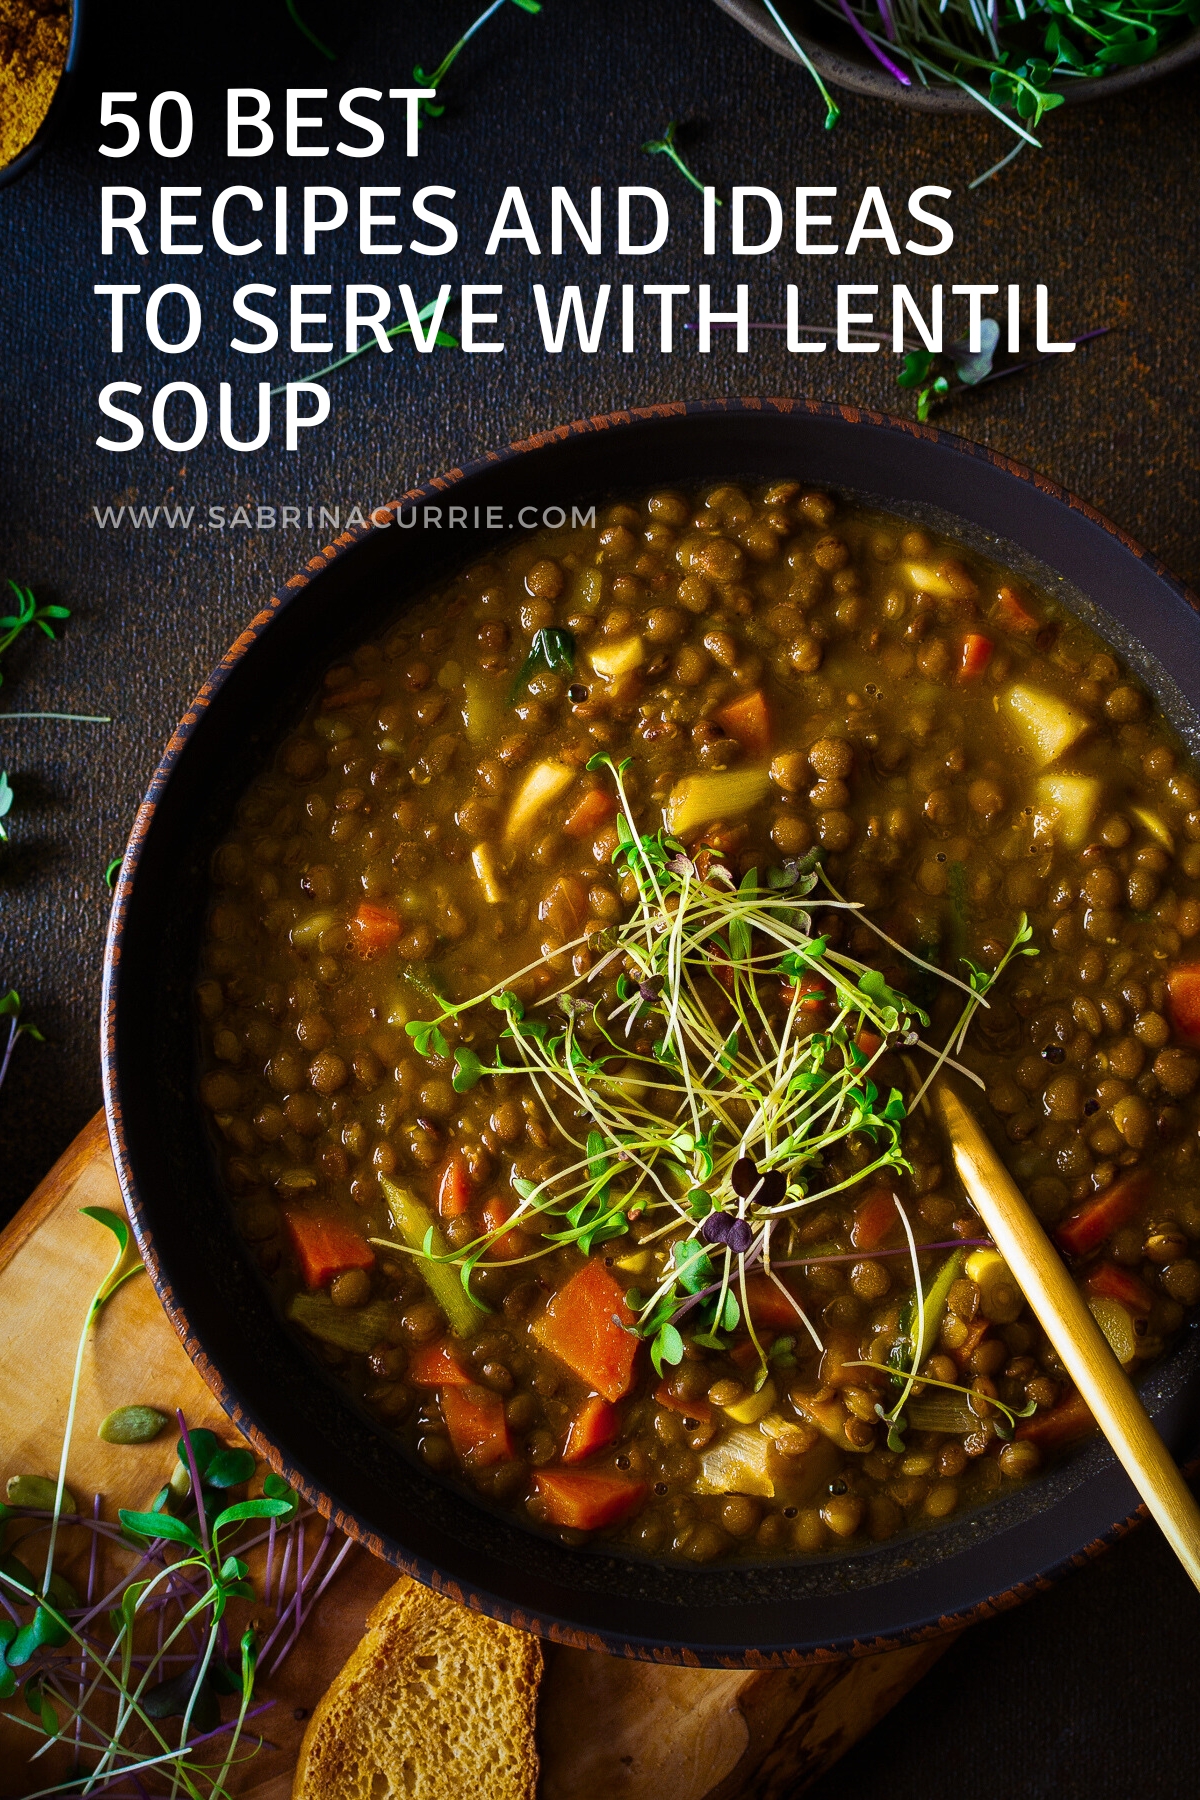 Bowl of brown lentil stew with orange carrot chunks and white cubed potatoes topped with green alfalfa sprouts and the title of 50 best recipes and ideas to serve with lentil soup, written in the top left corner.